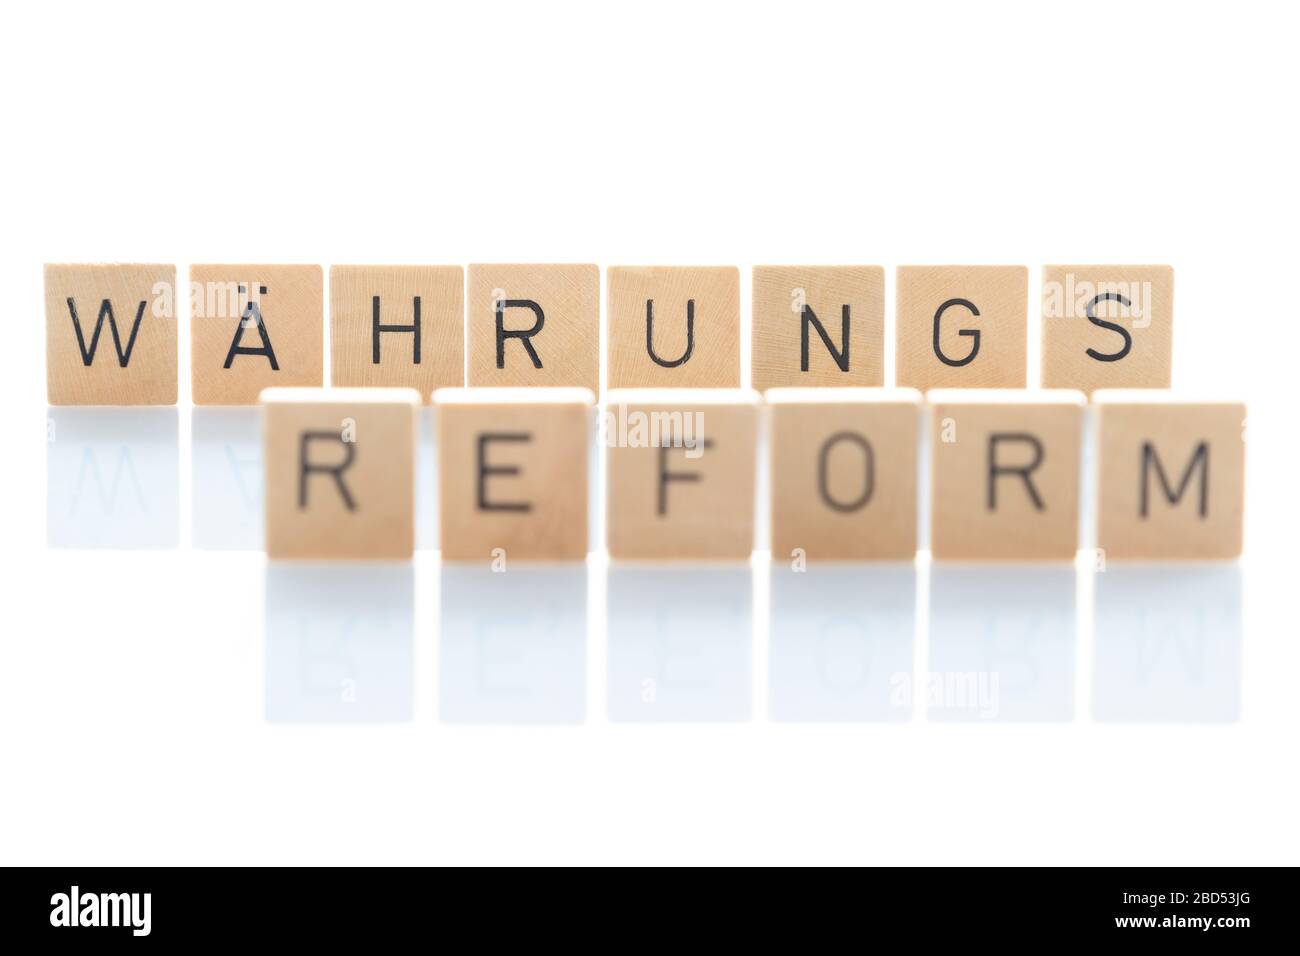 Currency reform, solution to high debts. 'Währungsreform' as a word isolated on white background. Germany Stock Photo